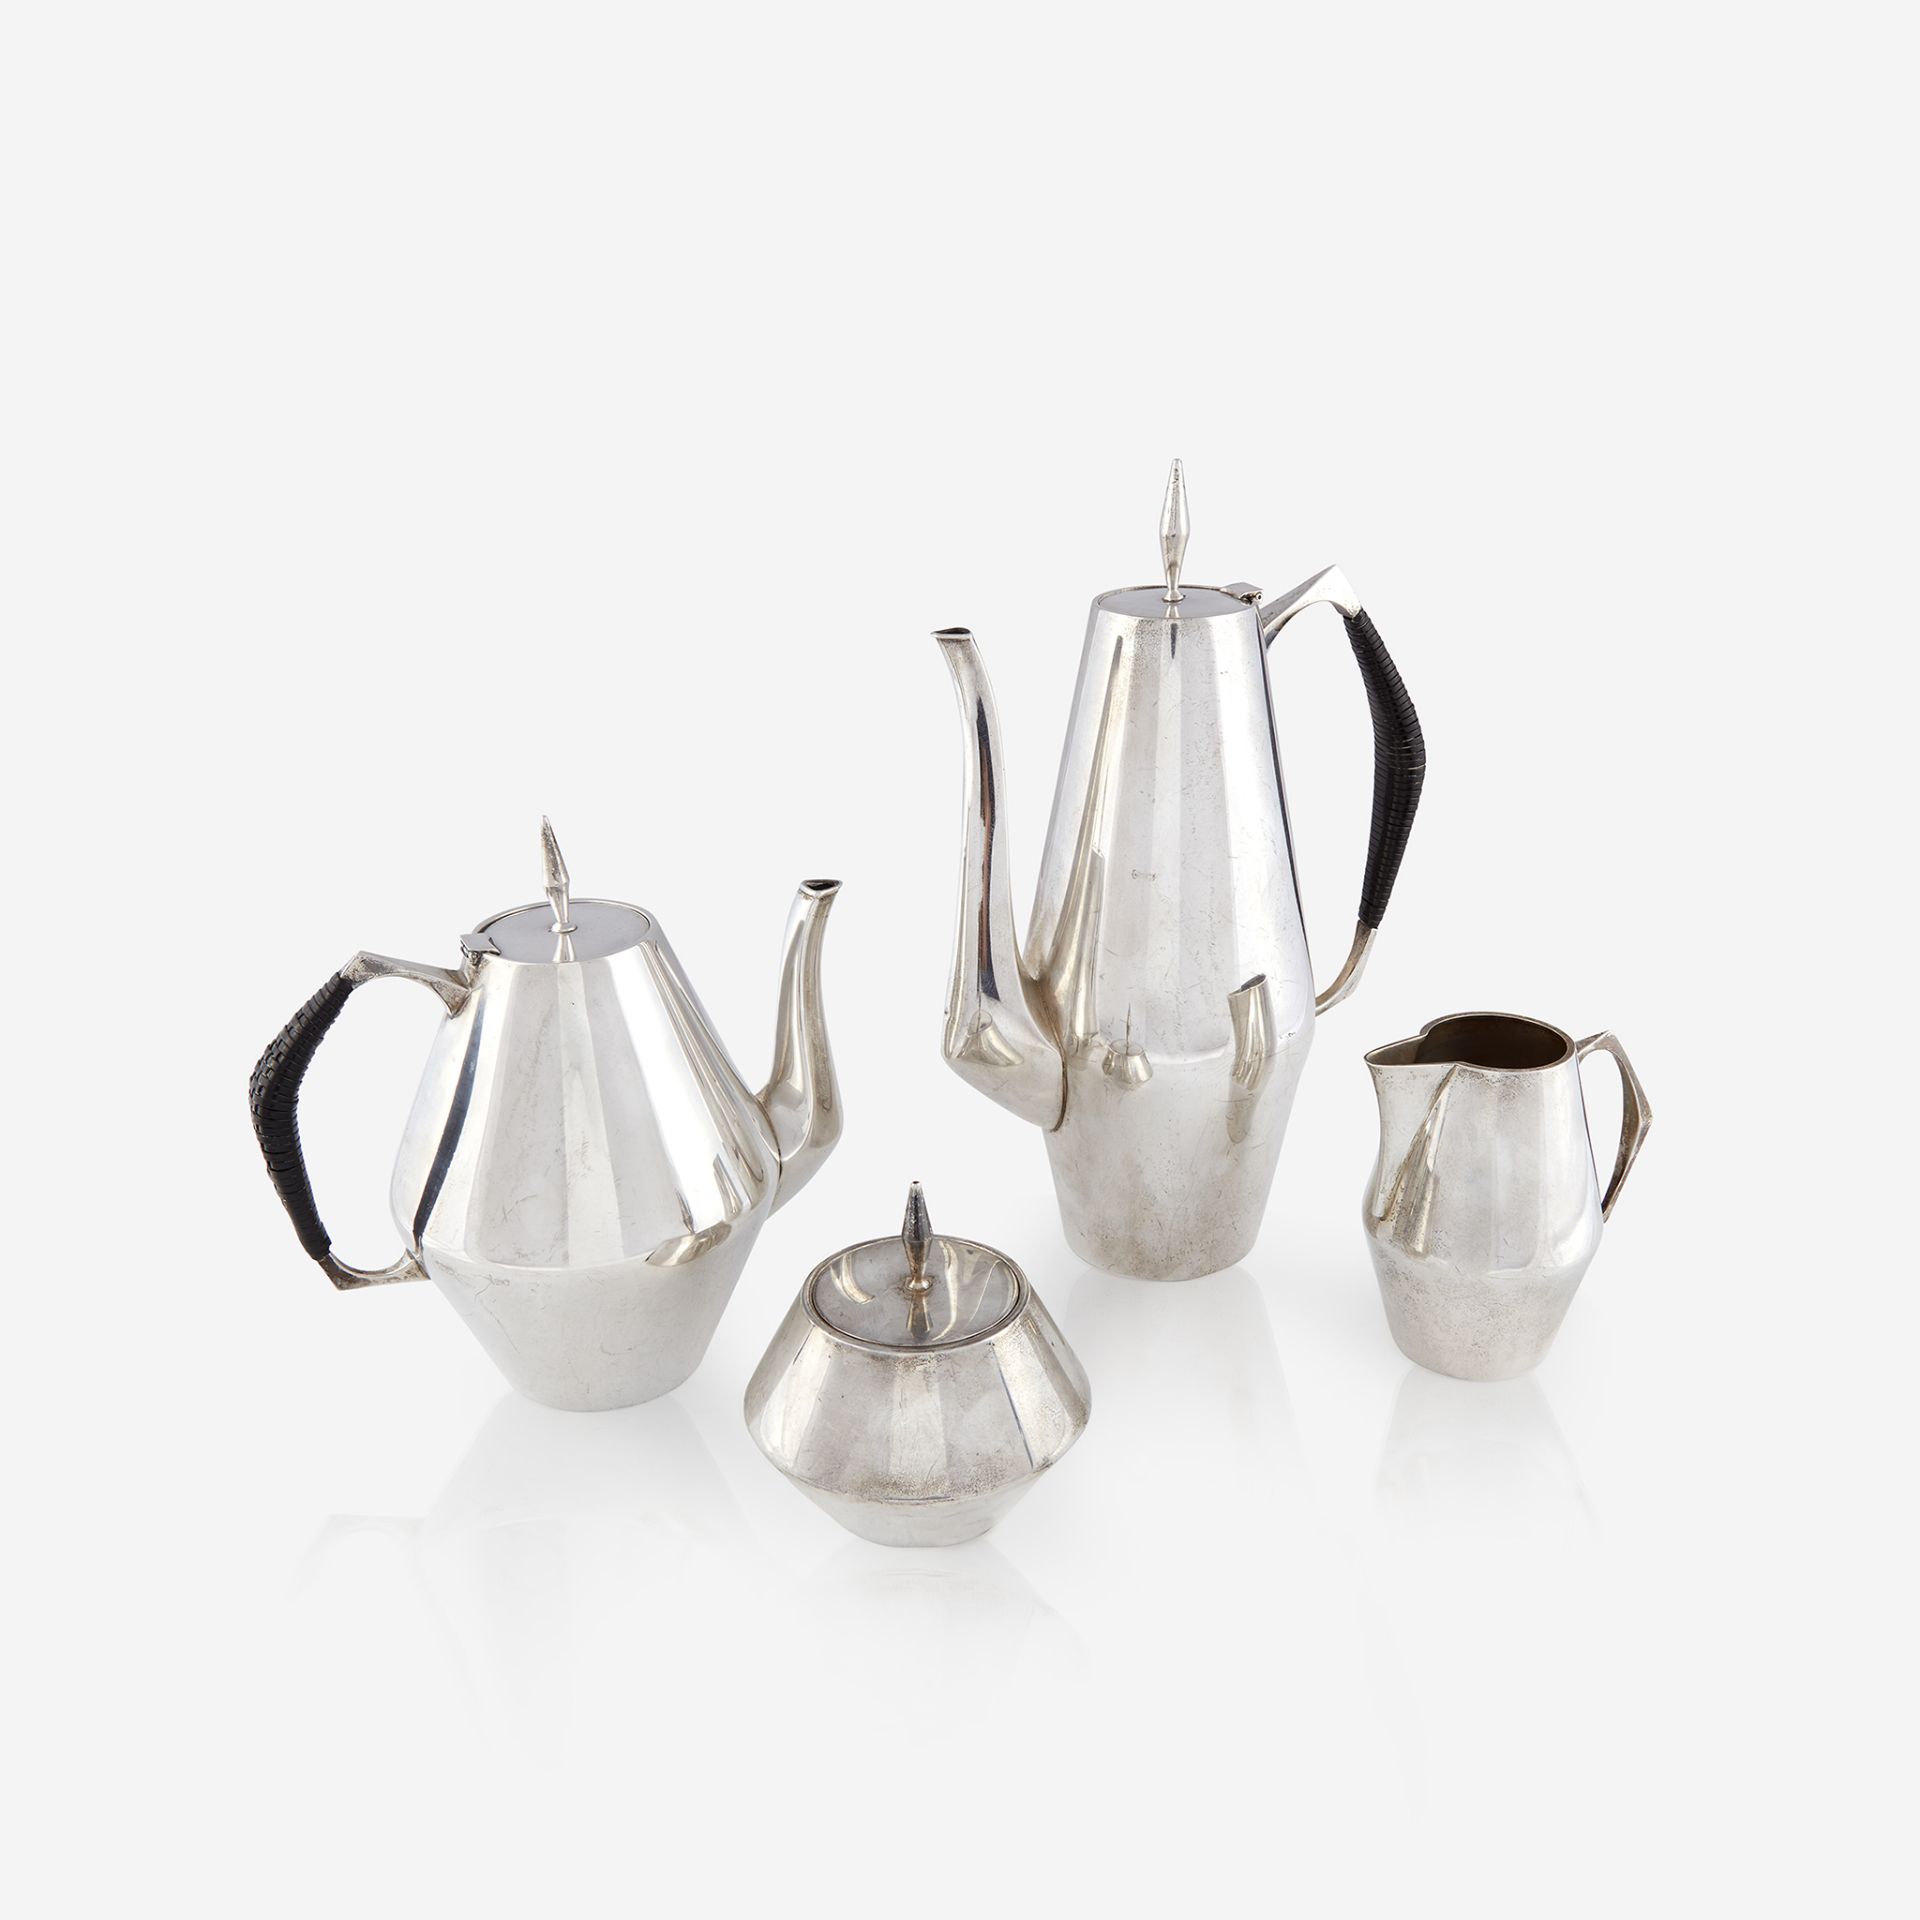 An American sterling silver tea and coffee service, Gio Ponti for Reed & Barton, Tauton, MA, 20th ce